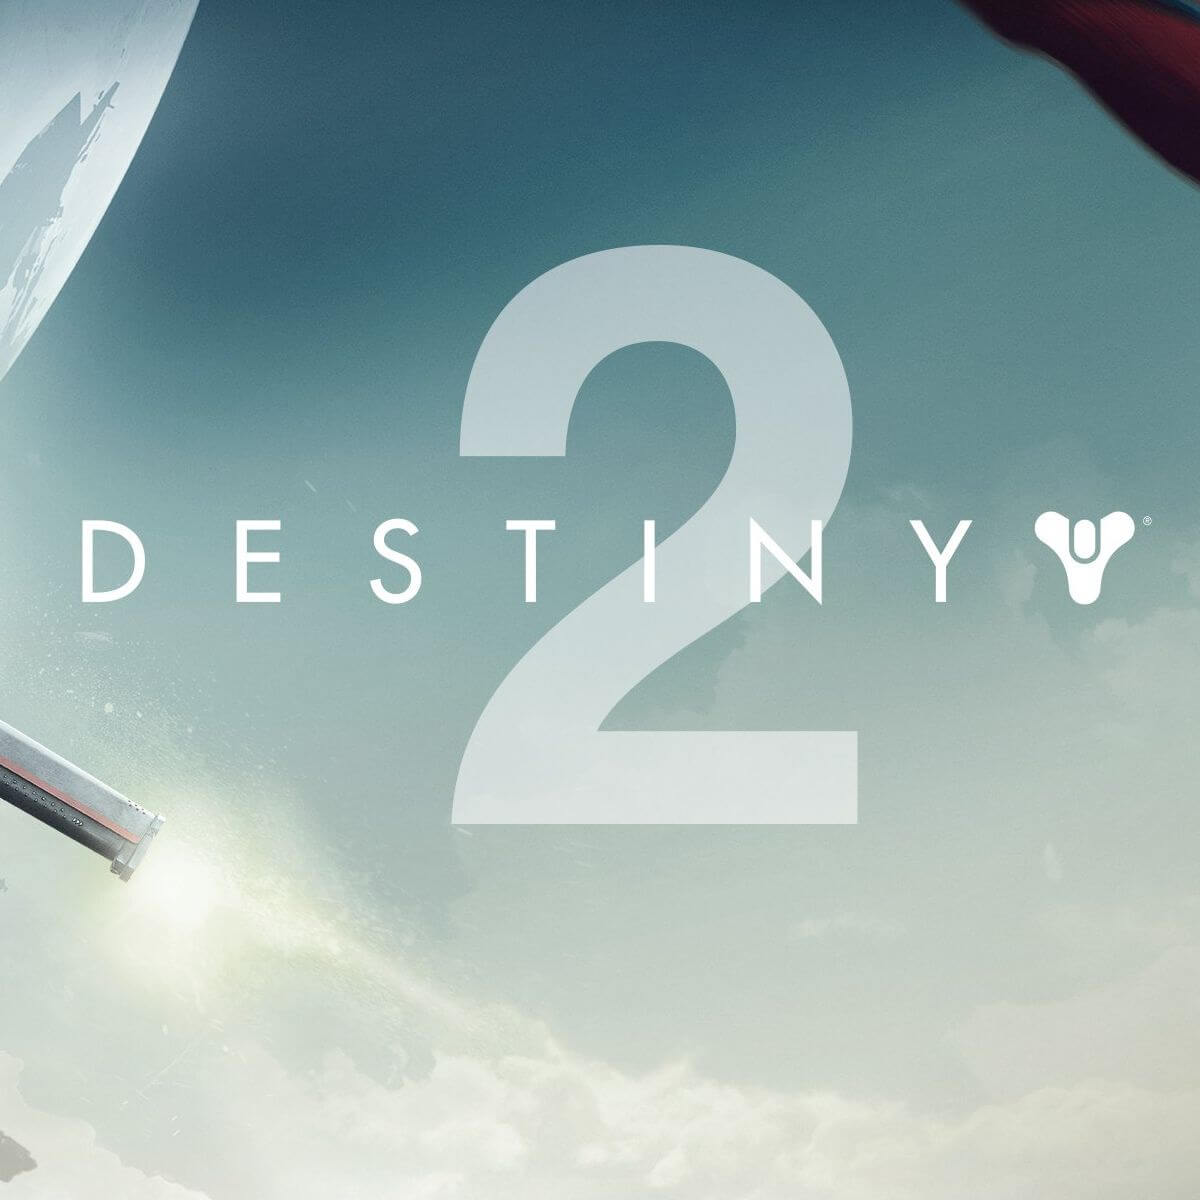 Destiny 2 failed to download configuration files